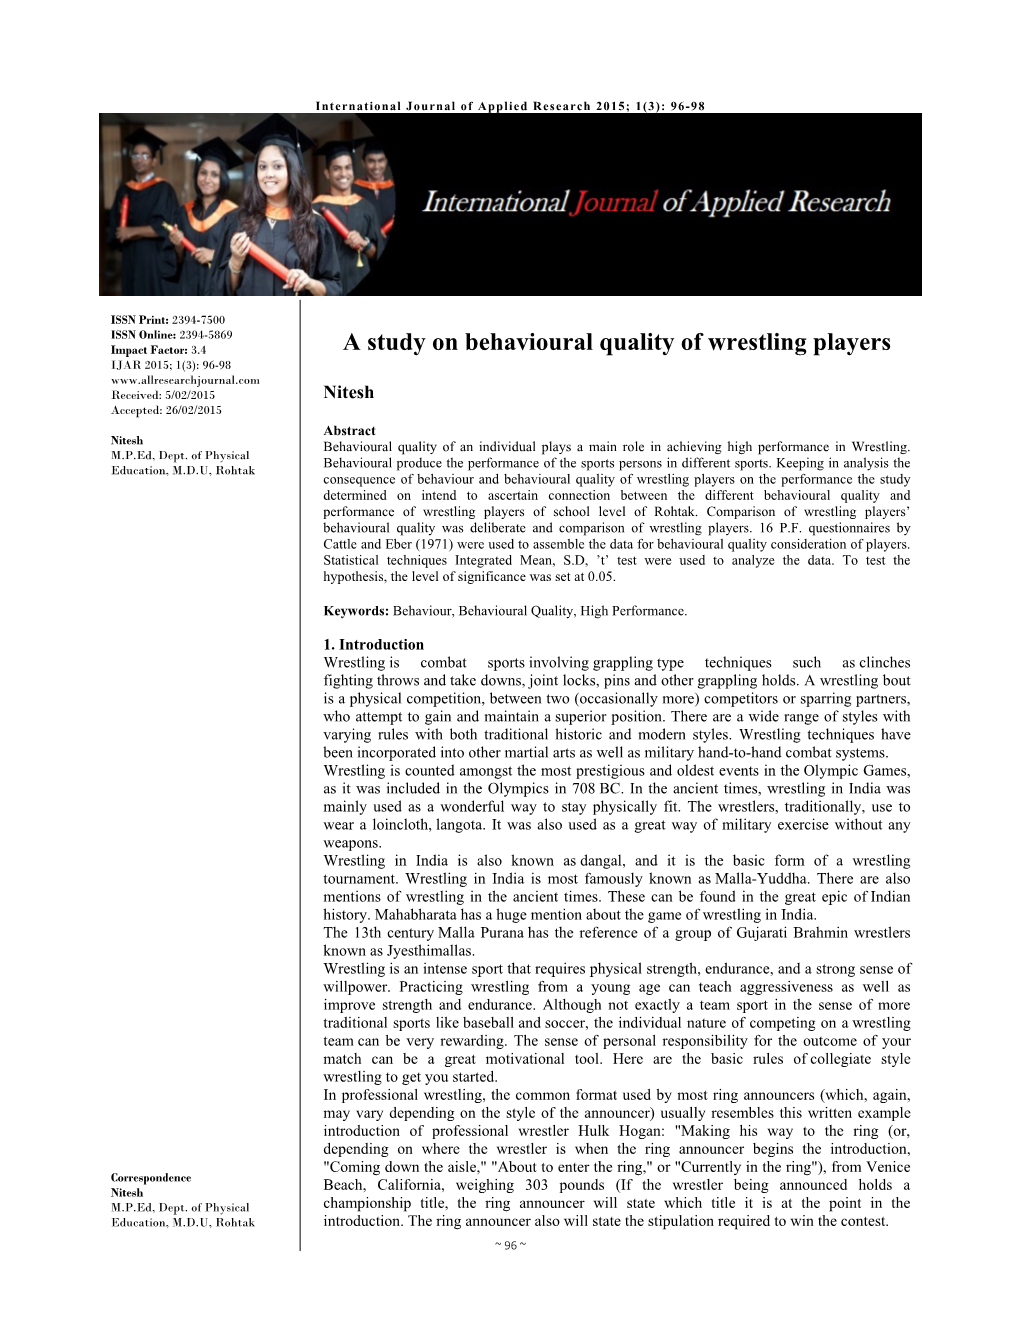 A Study on Behavioural Quality of Wrestling Players